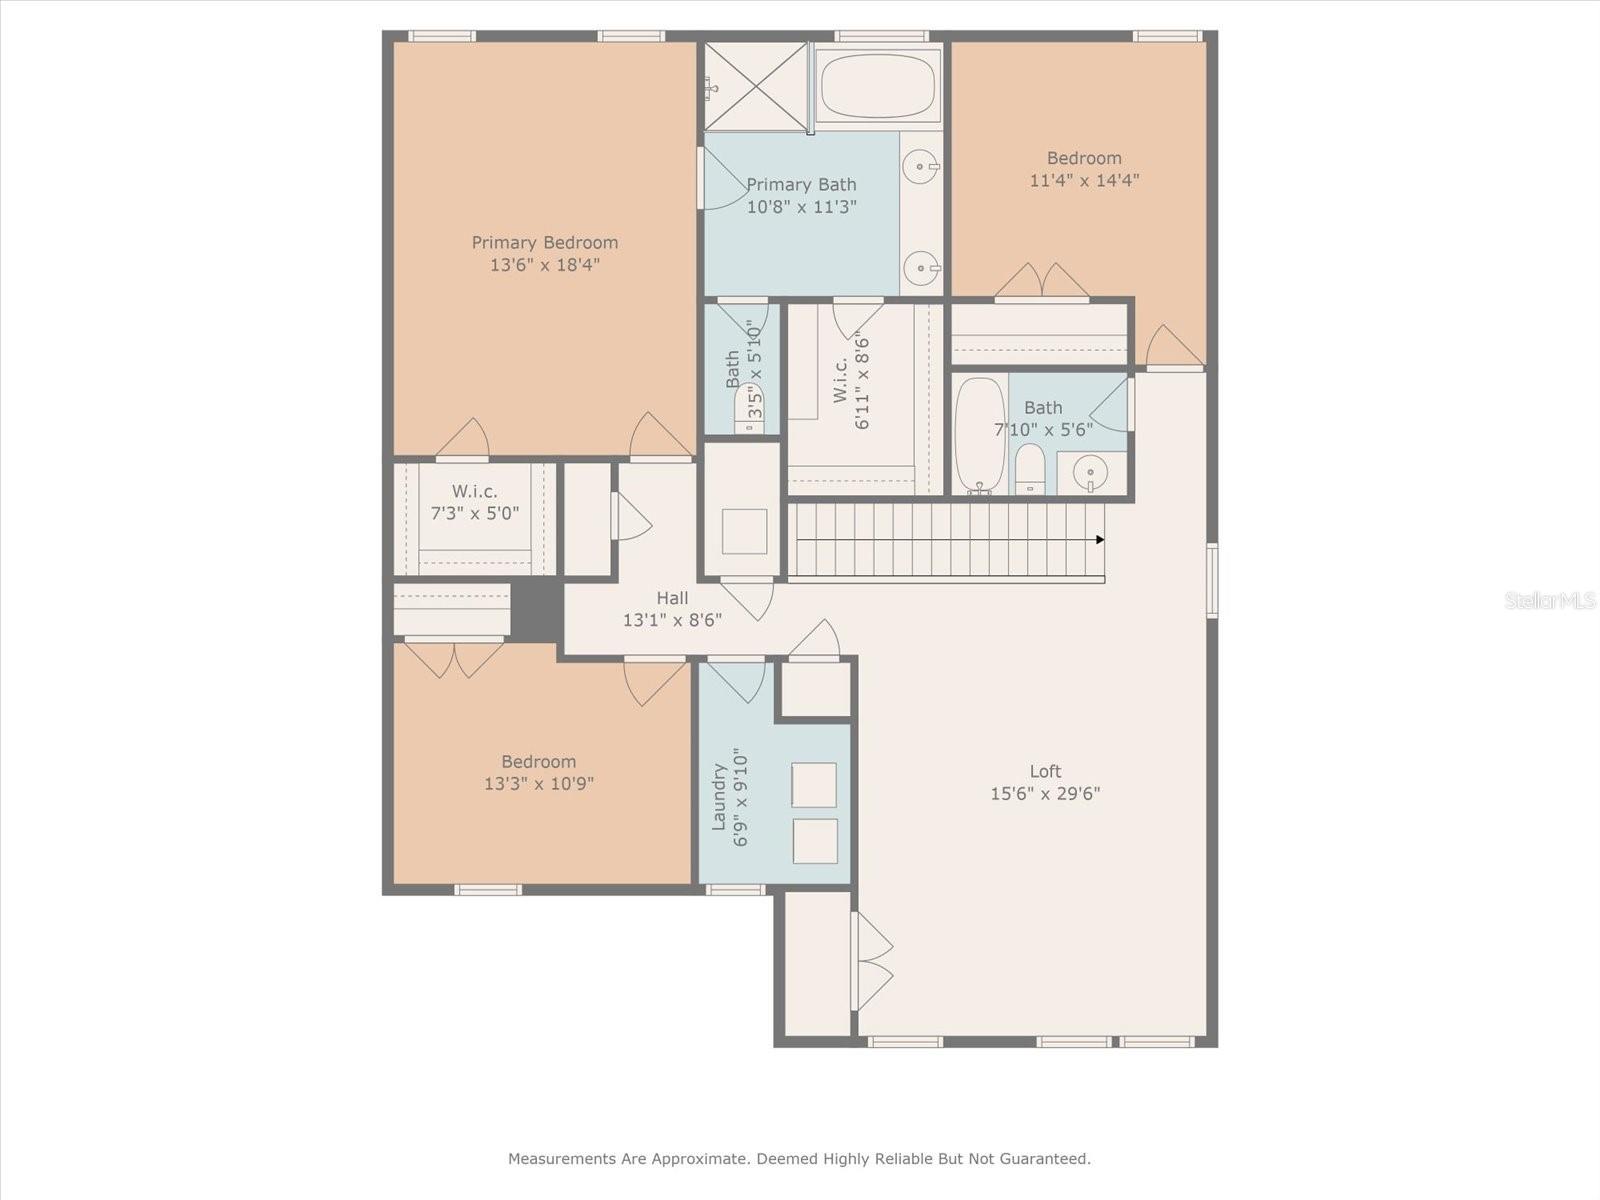 First floor plan shows the living space as well as the guest bedroom with full bathroom. Measurements to be verified by the buyer.